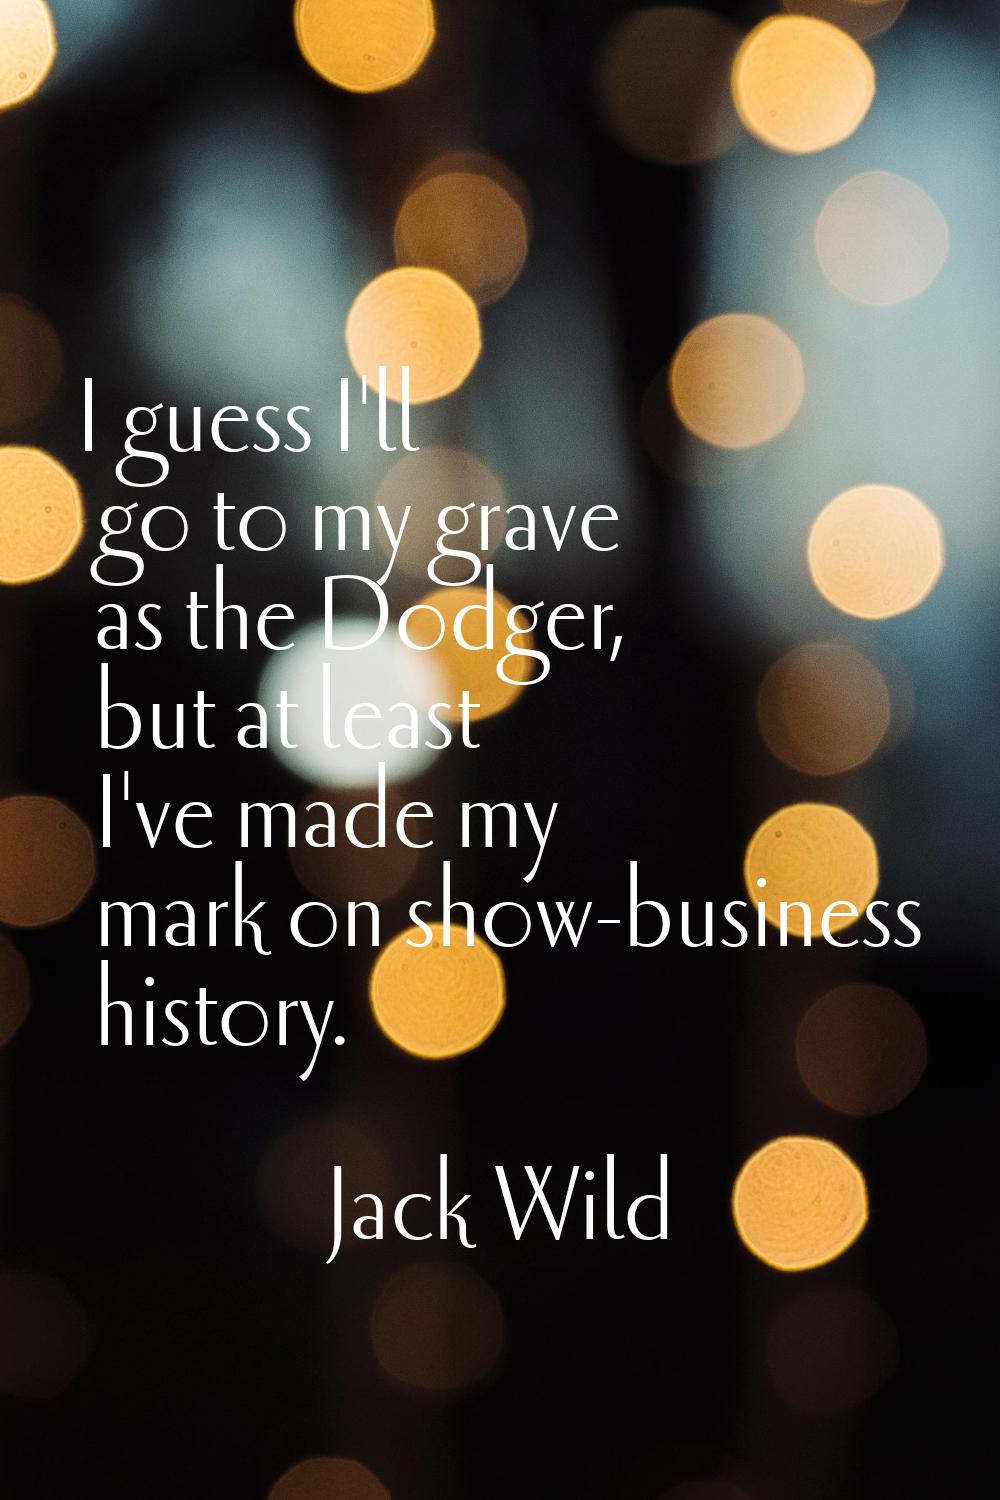 I guess I'll go to my grave as the Dodger, but at least I've made my mark on show-business history.